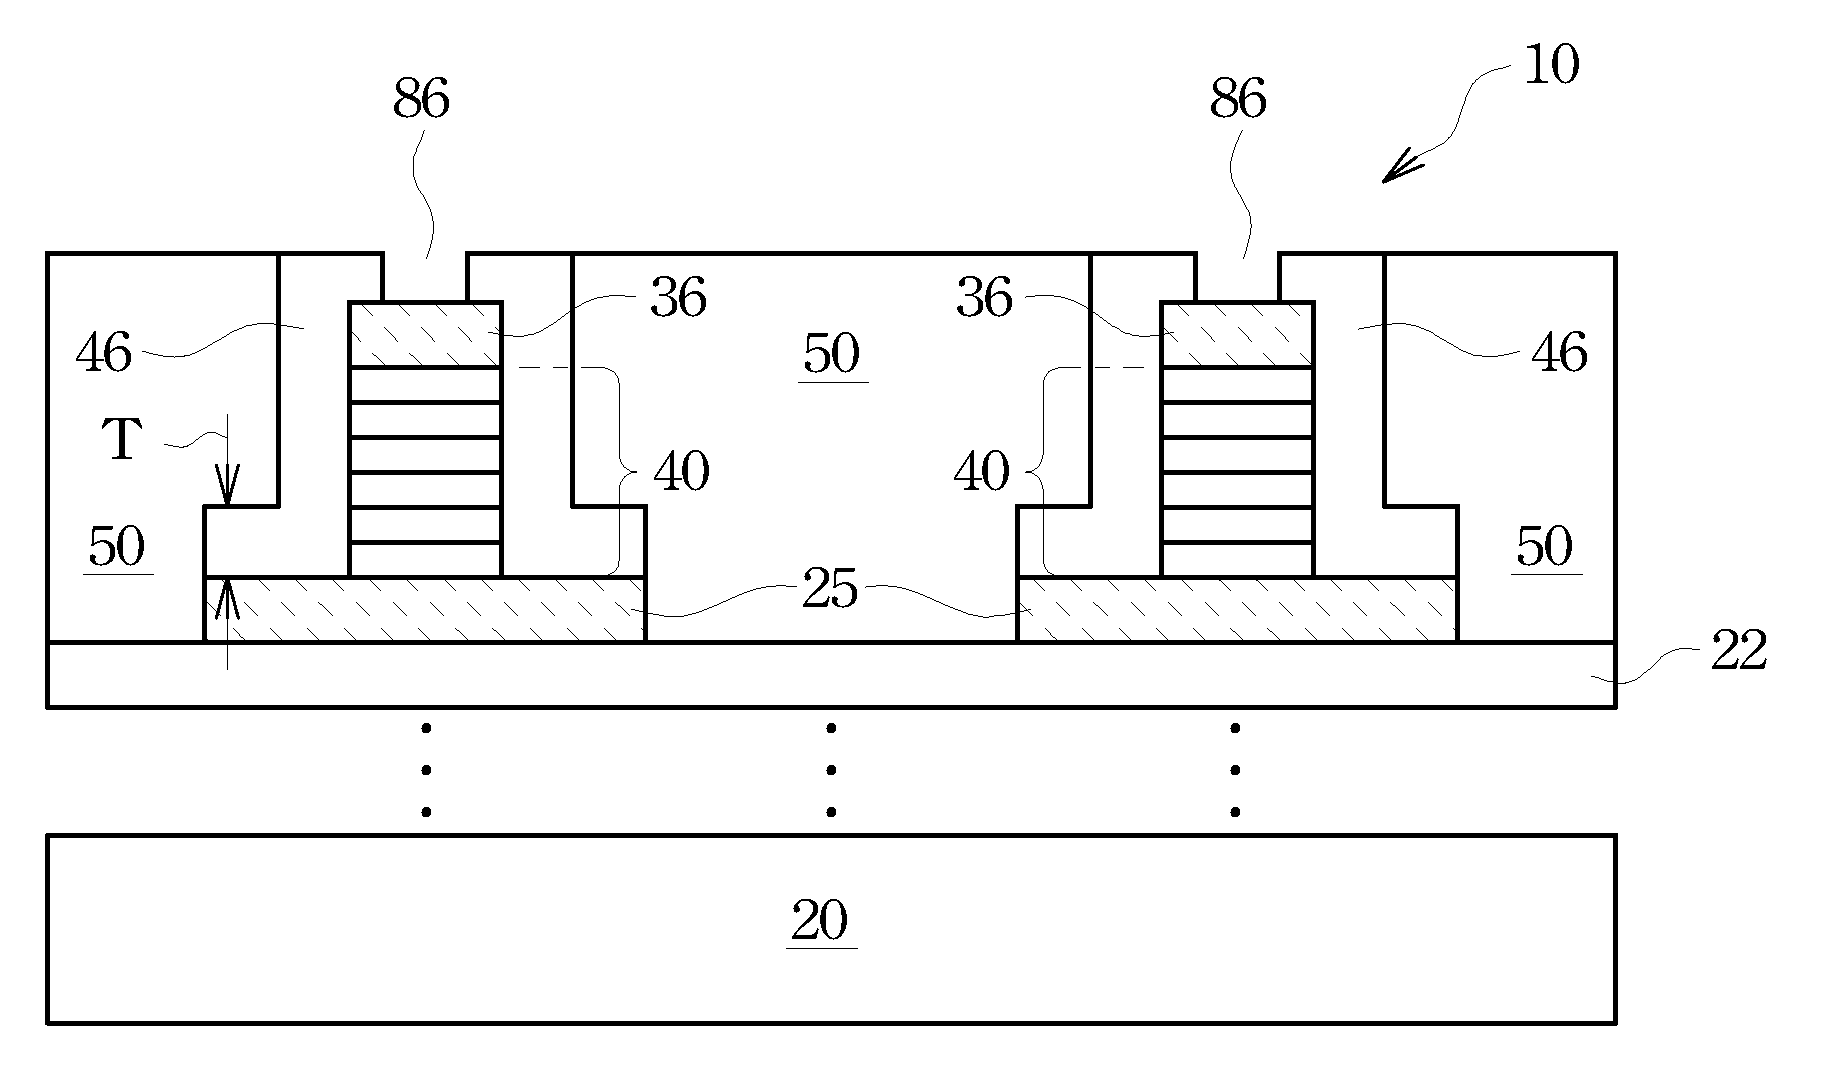 In-Situ Formed Capping Layer in MTJ Devices